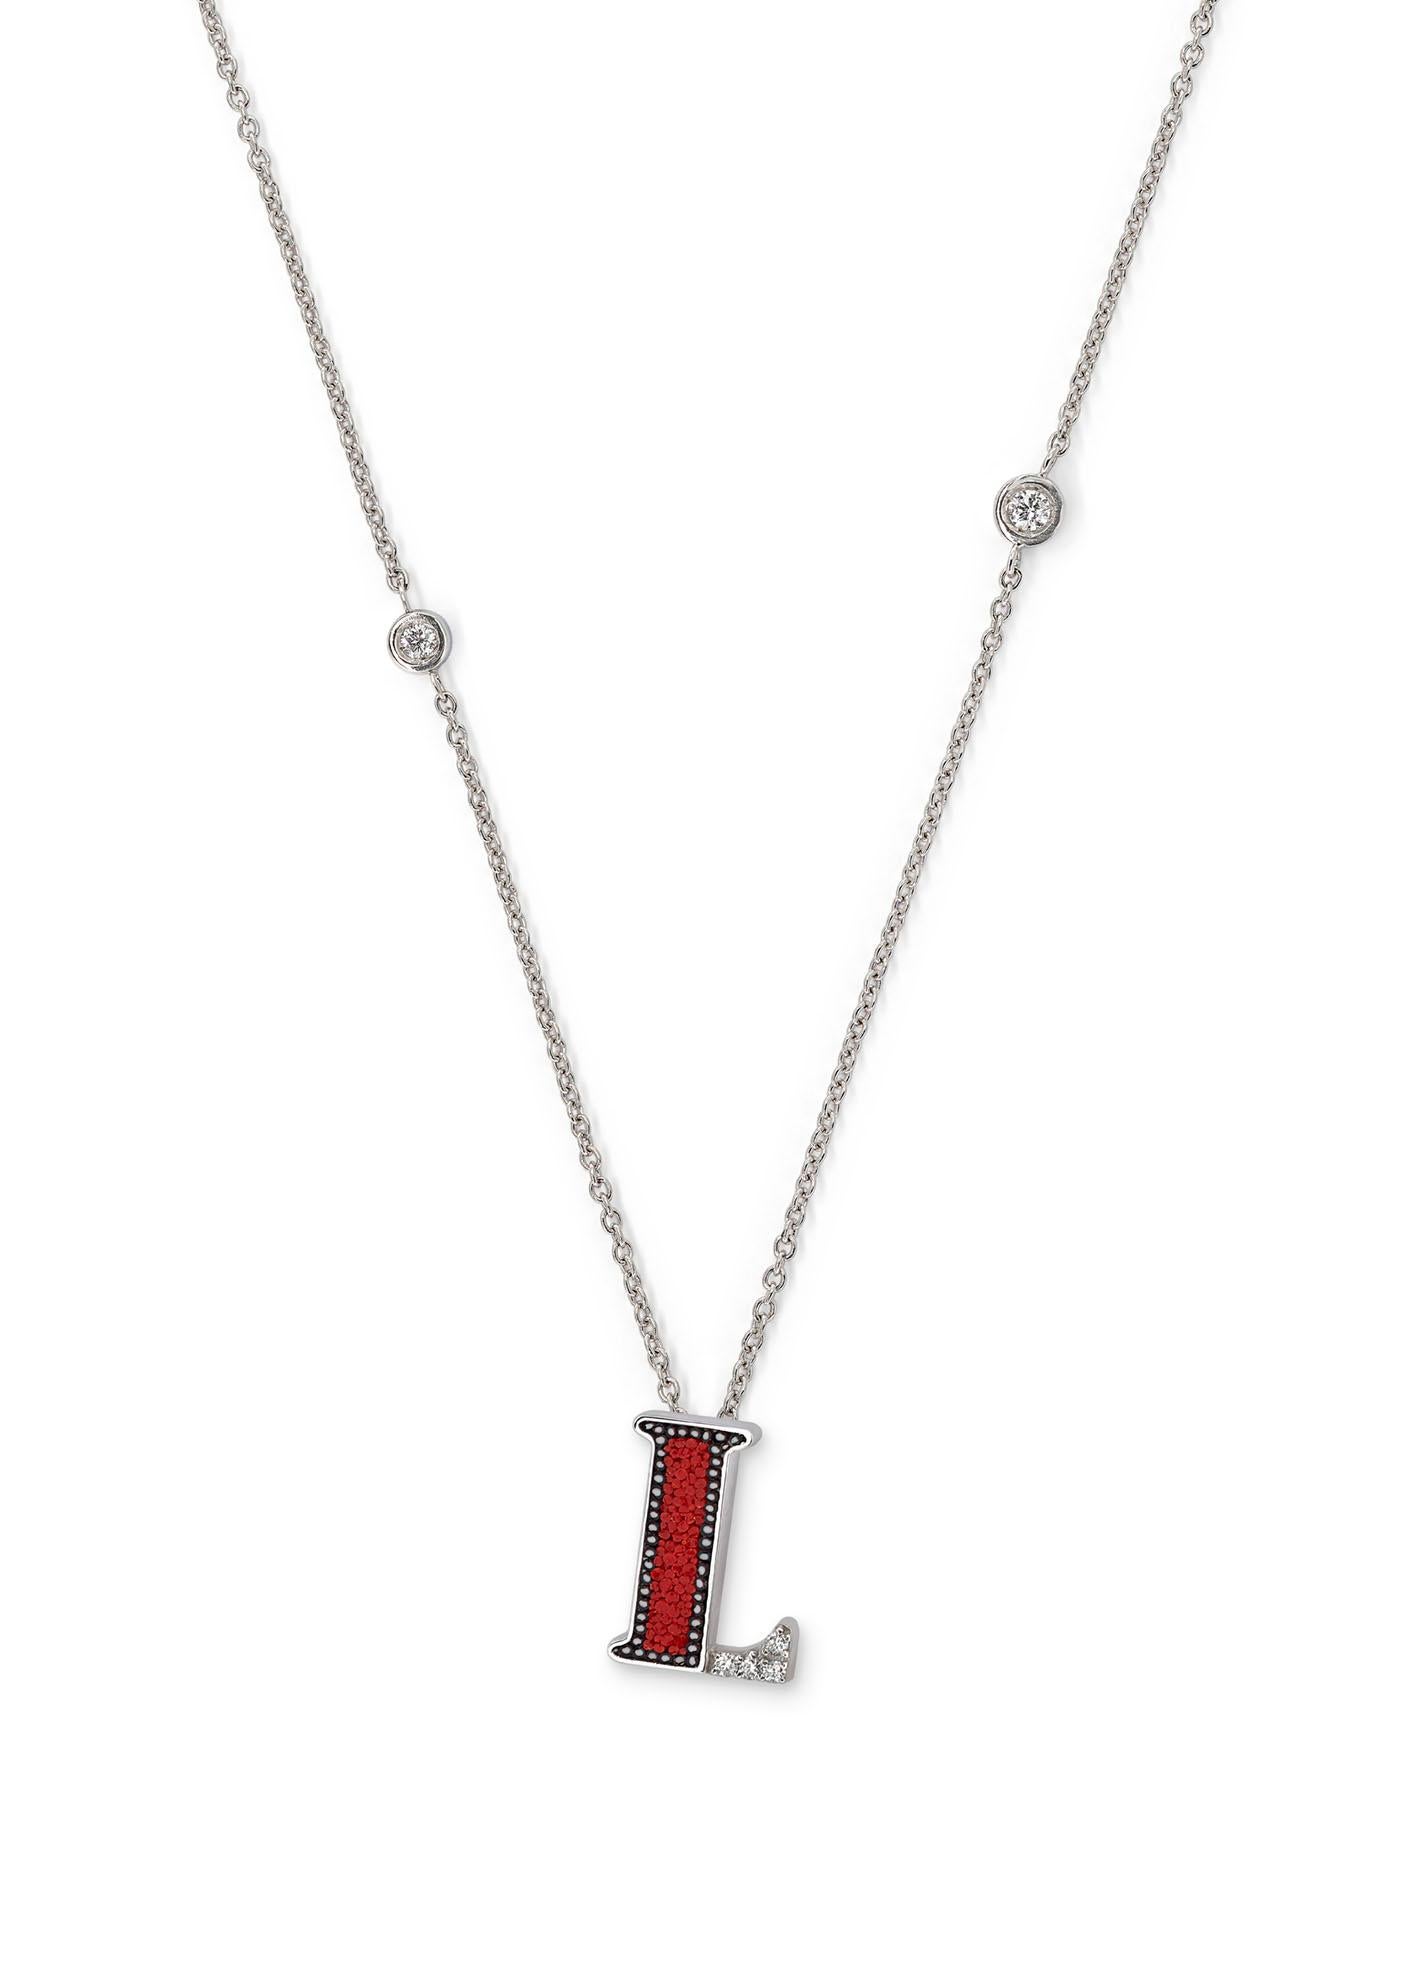 Brilliant Cut Necklace Letter L White Gold White Diamonds Hand Decorated with Micromosaic For Sale